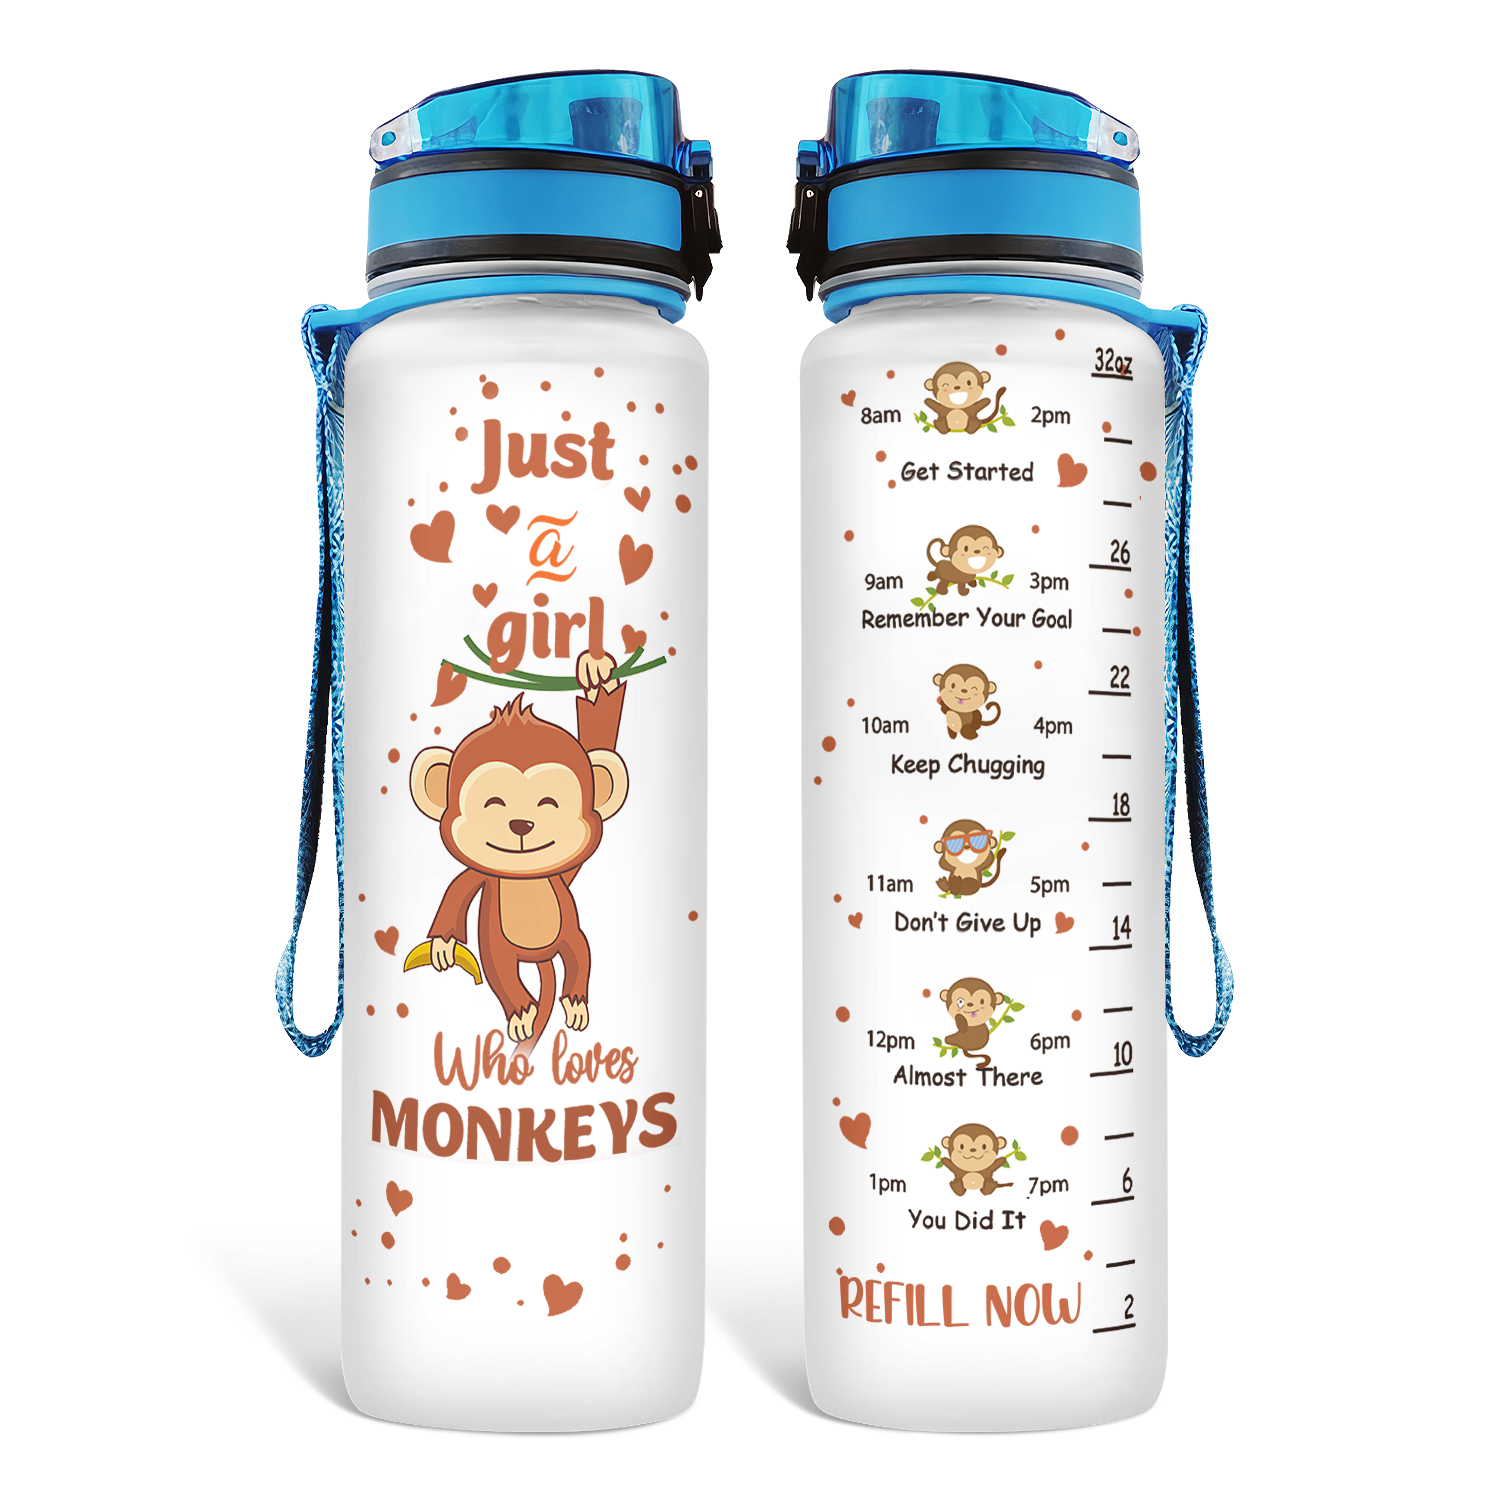 Drink Some Water Girl - Personalized Water Bottle With Time Marker